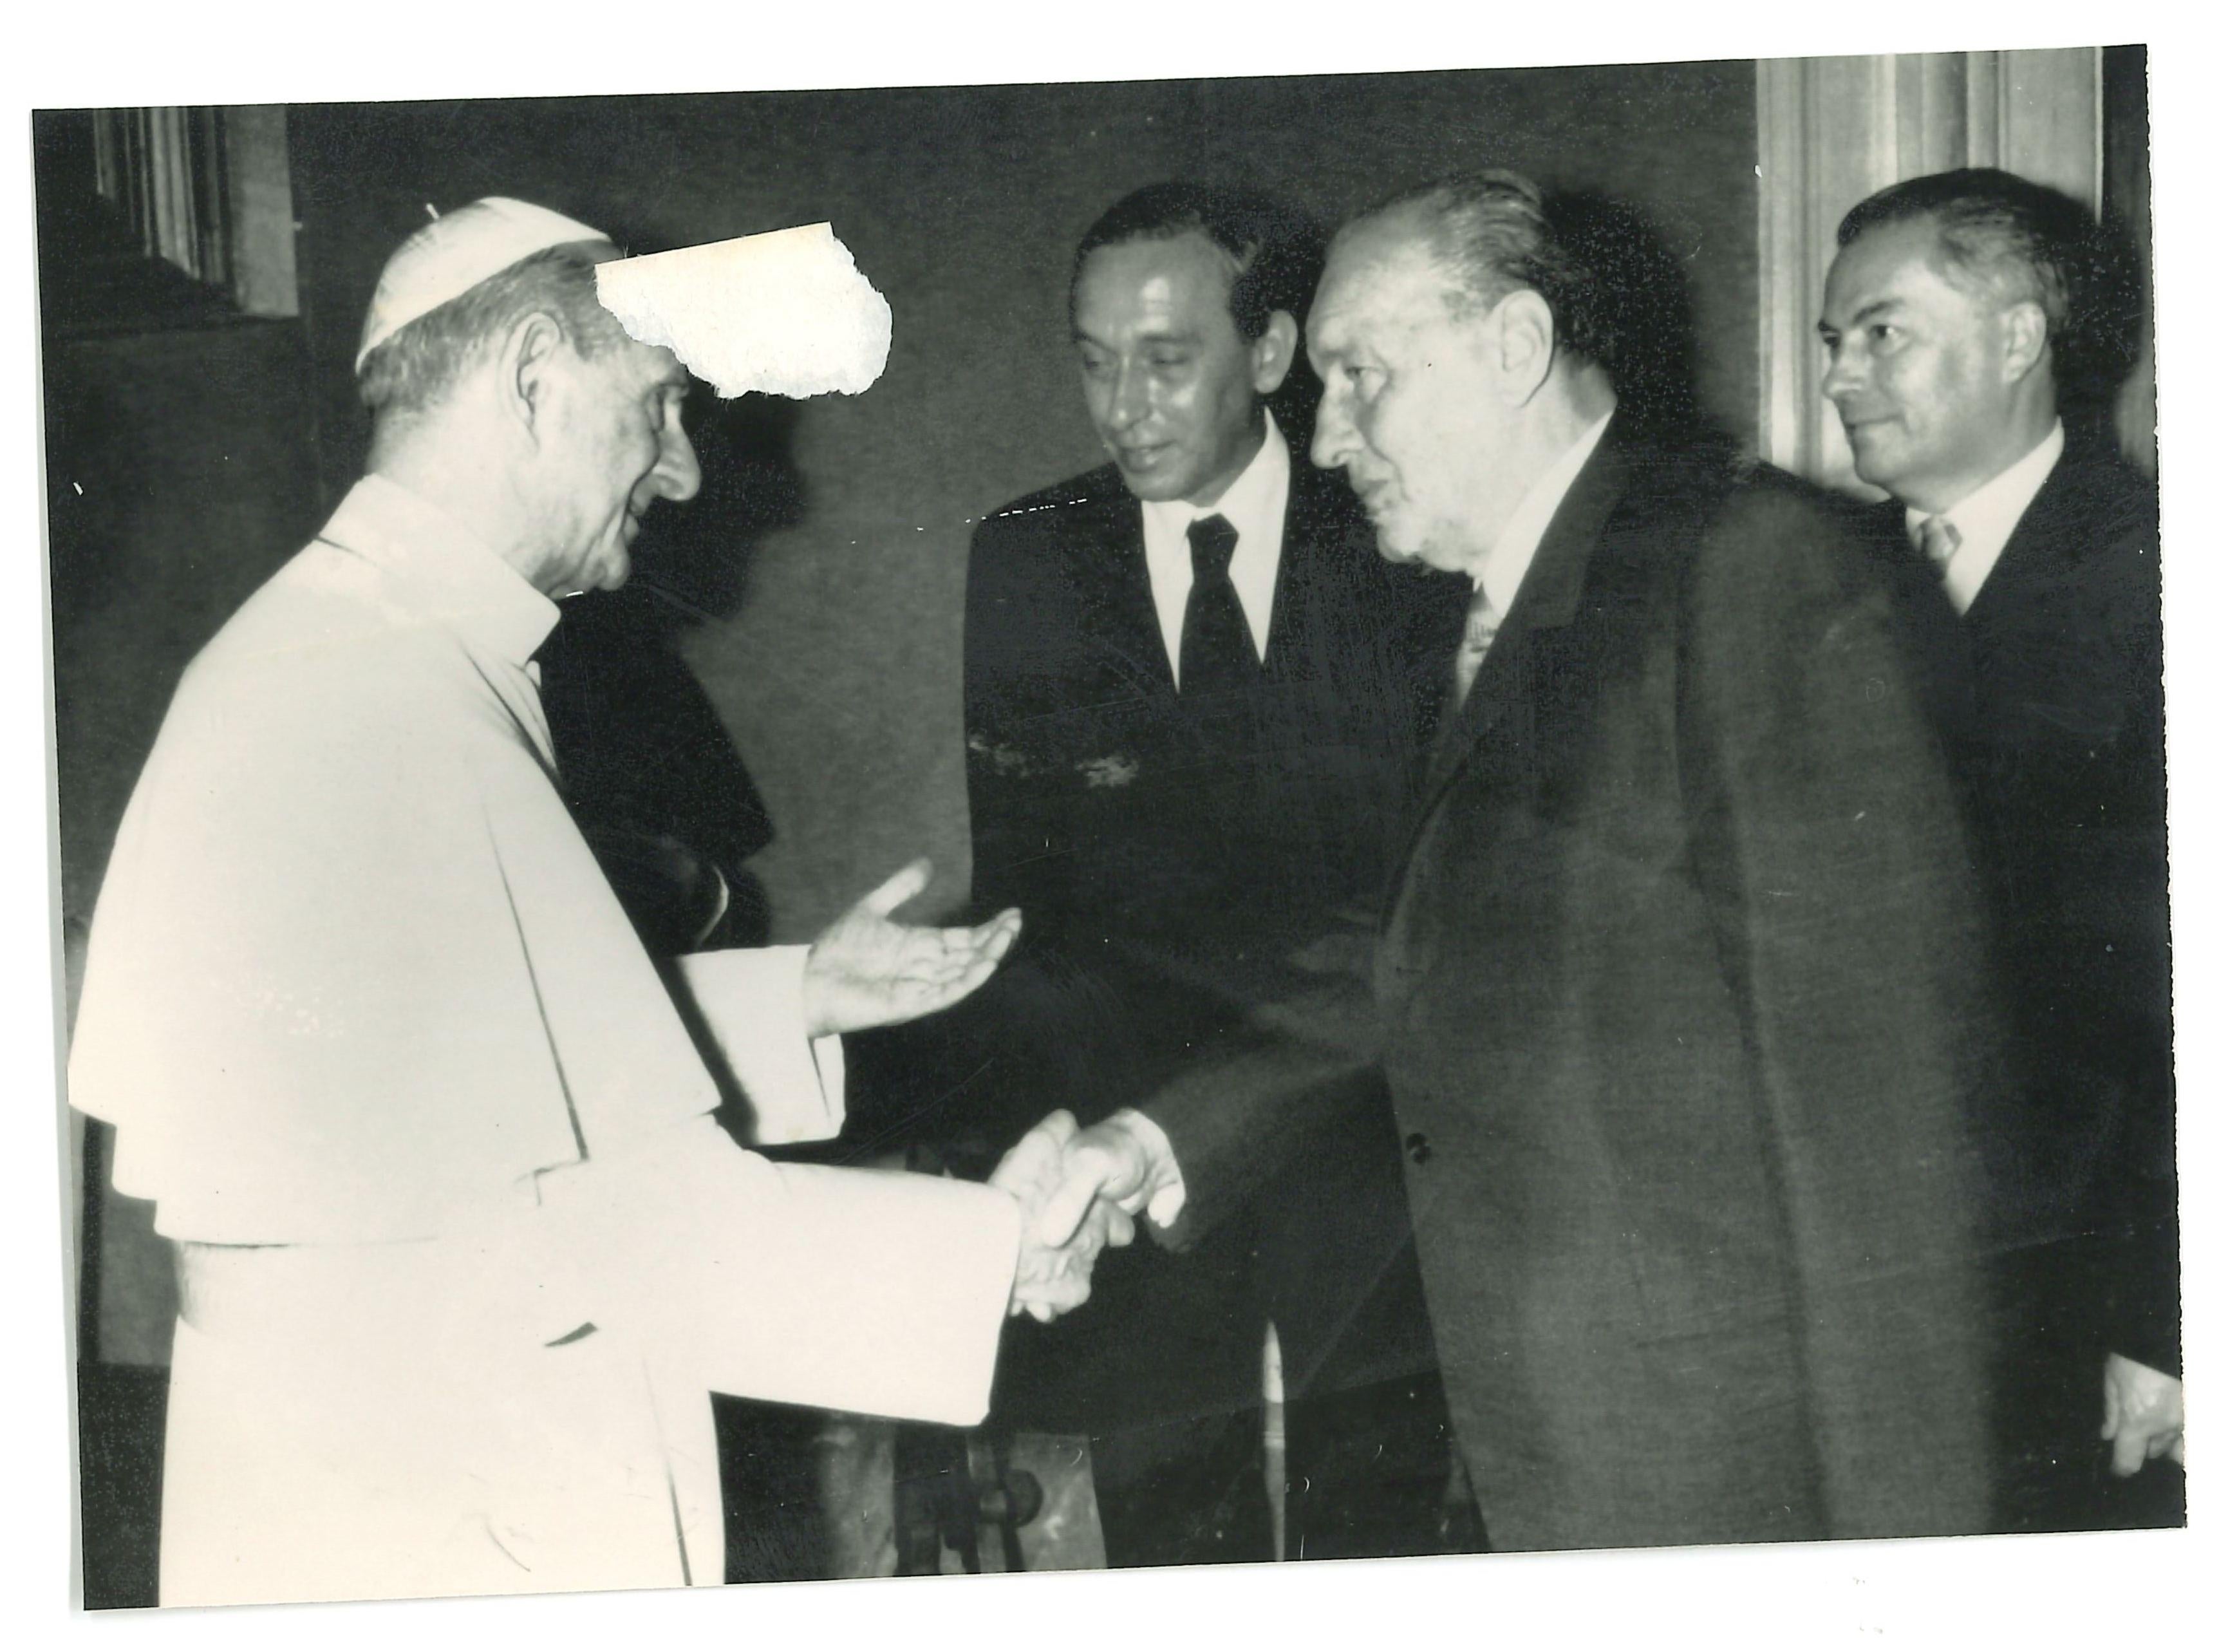 Unknown Figurative Photograph - Historical Photo- Pope Paul VI Shaking Hand with Janos Kadar - mid-20th Century